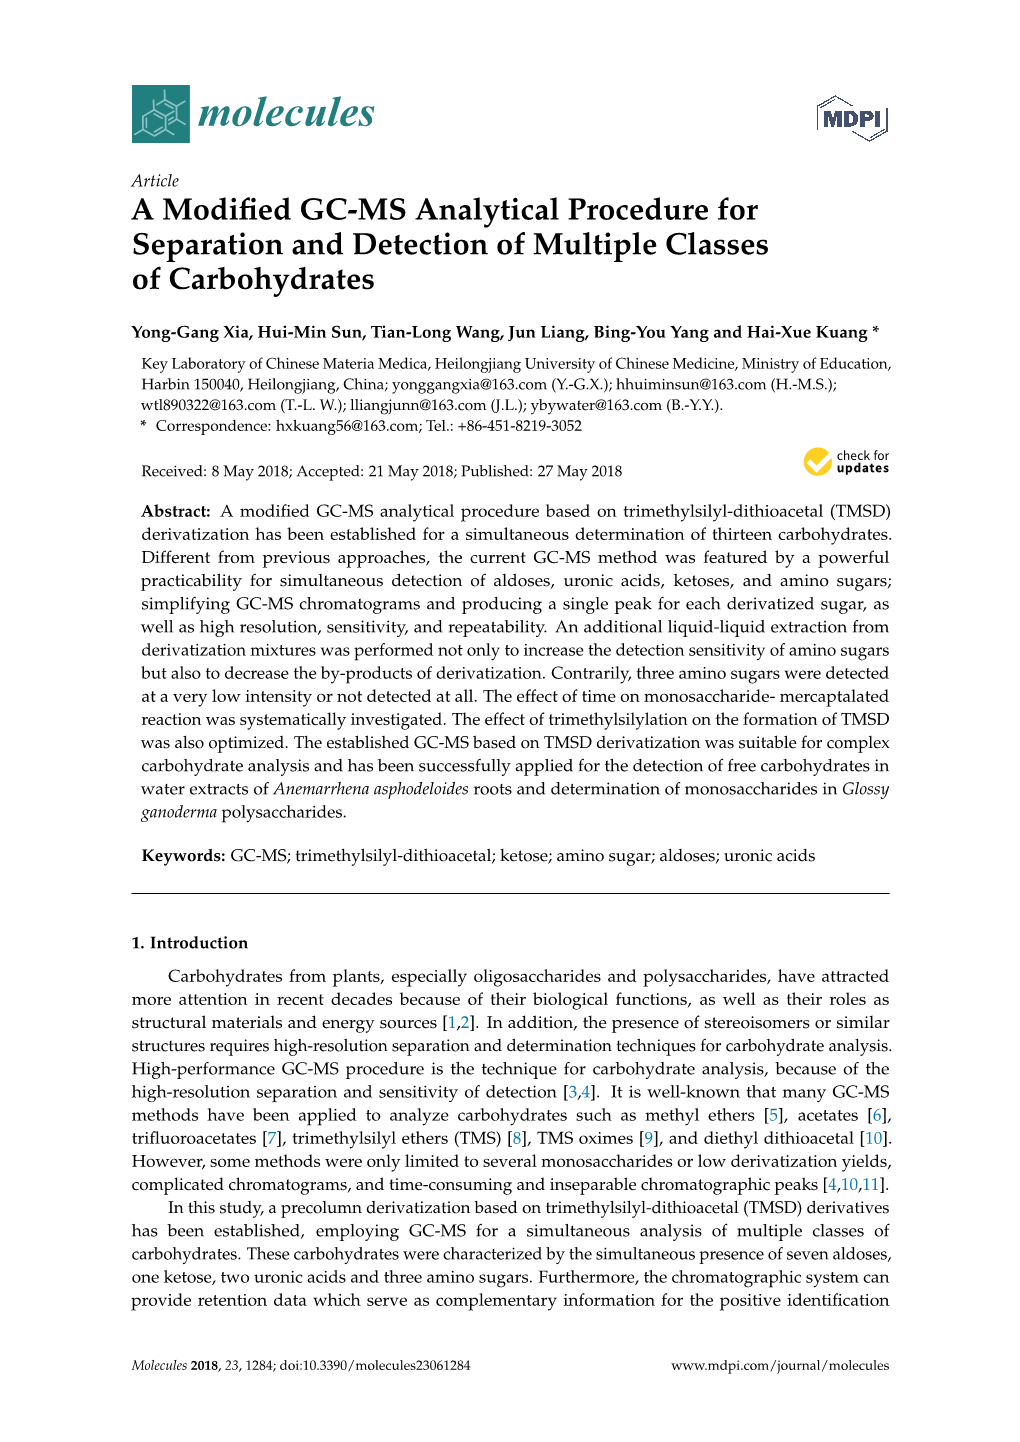 A Modified GC-MS Analytical Procedure for Separation And